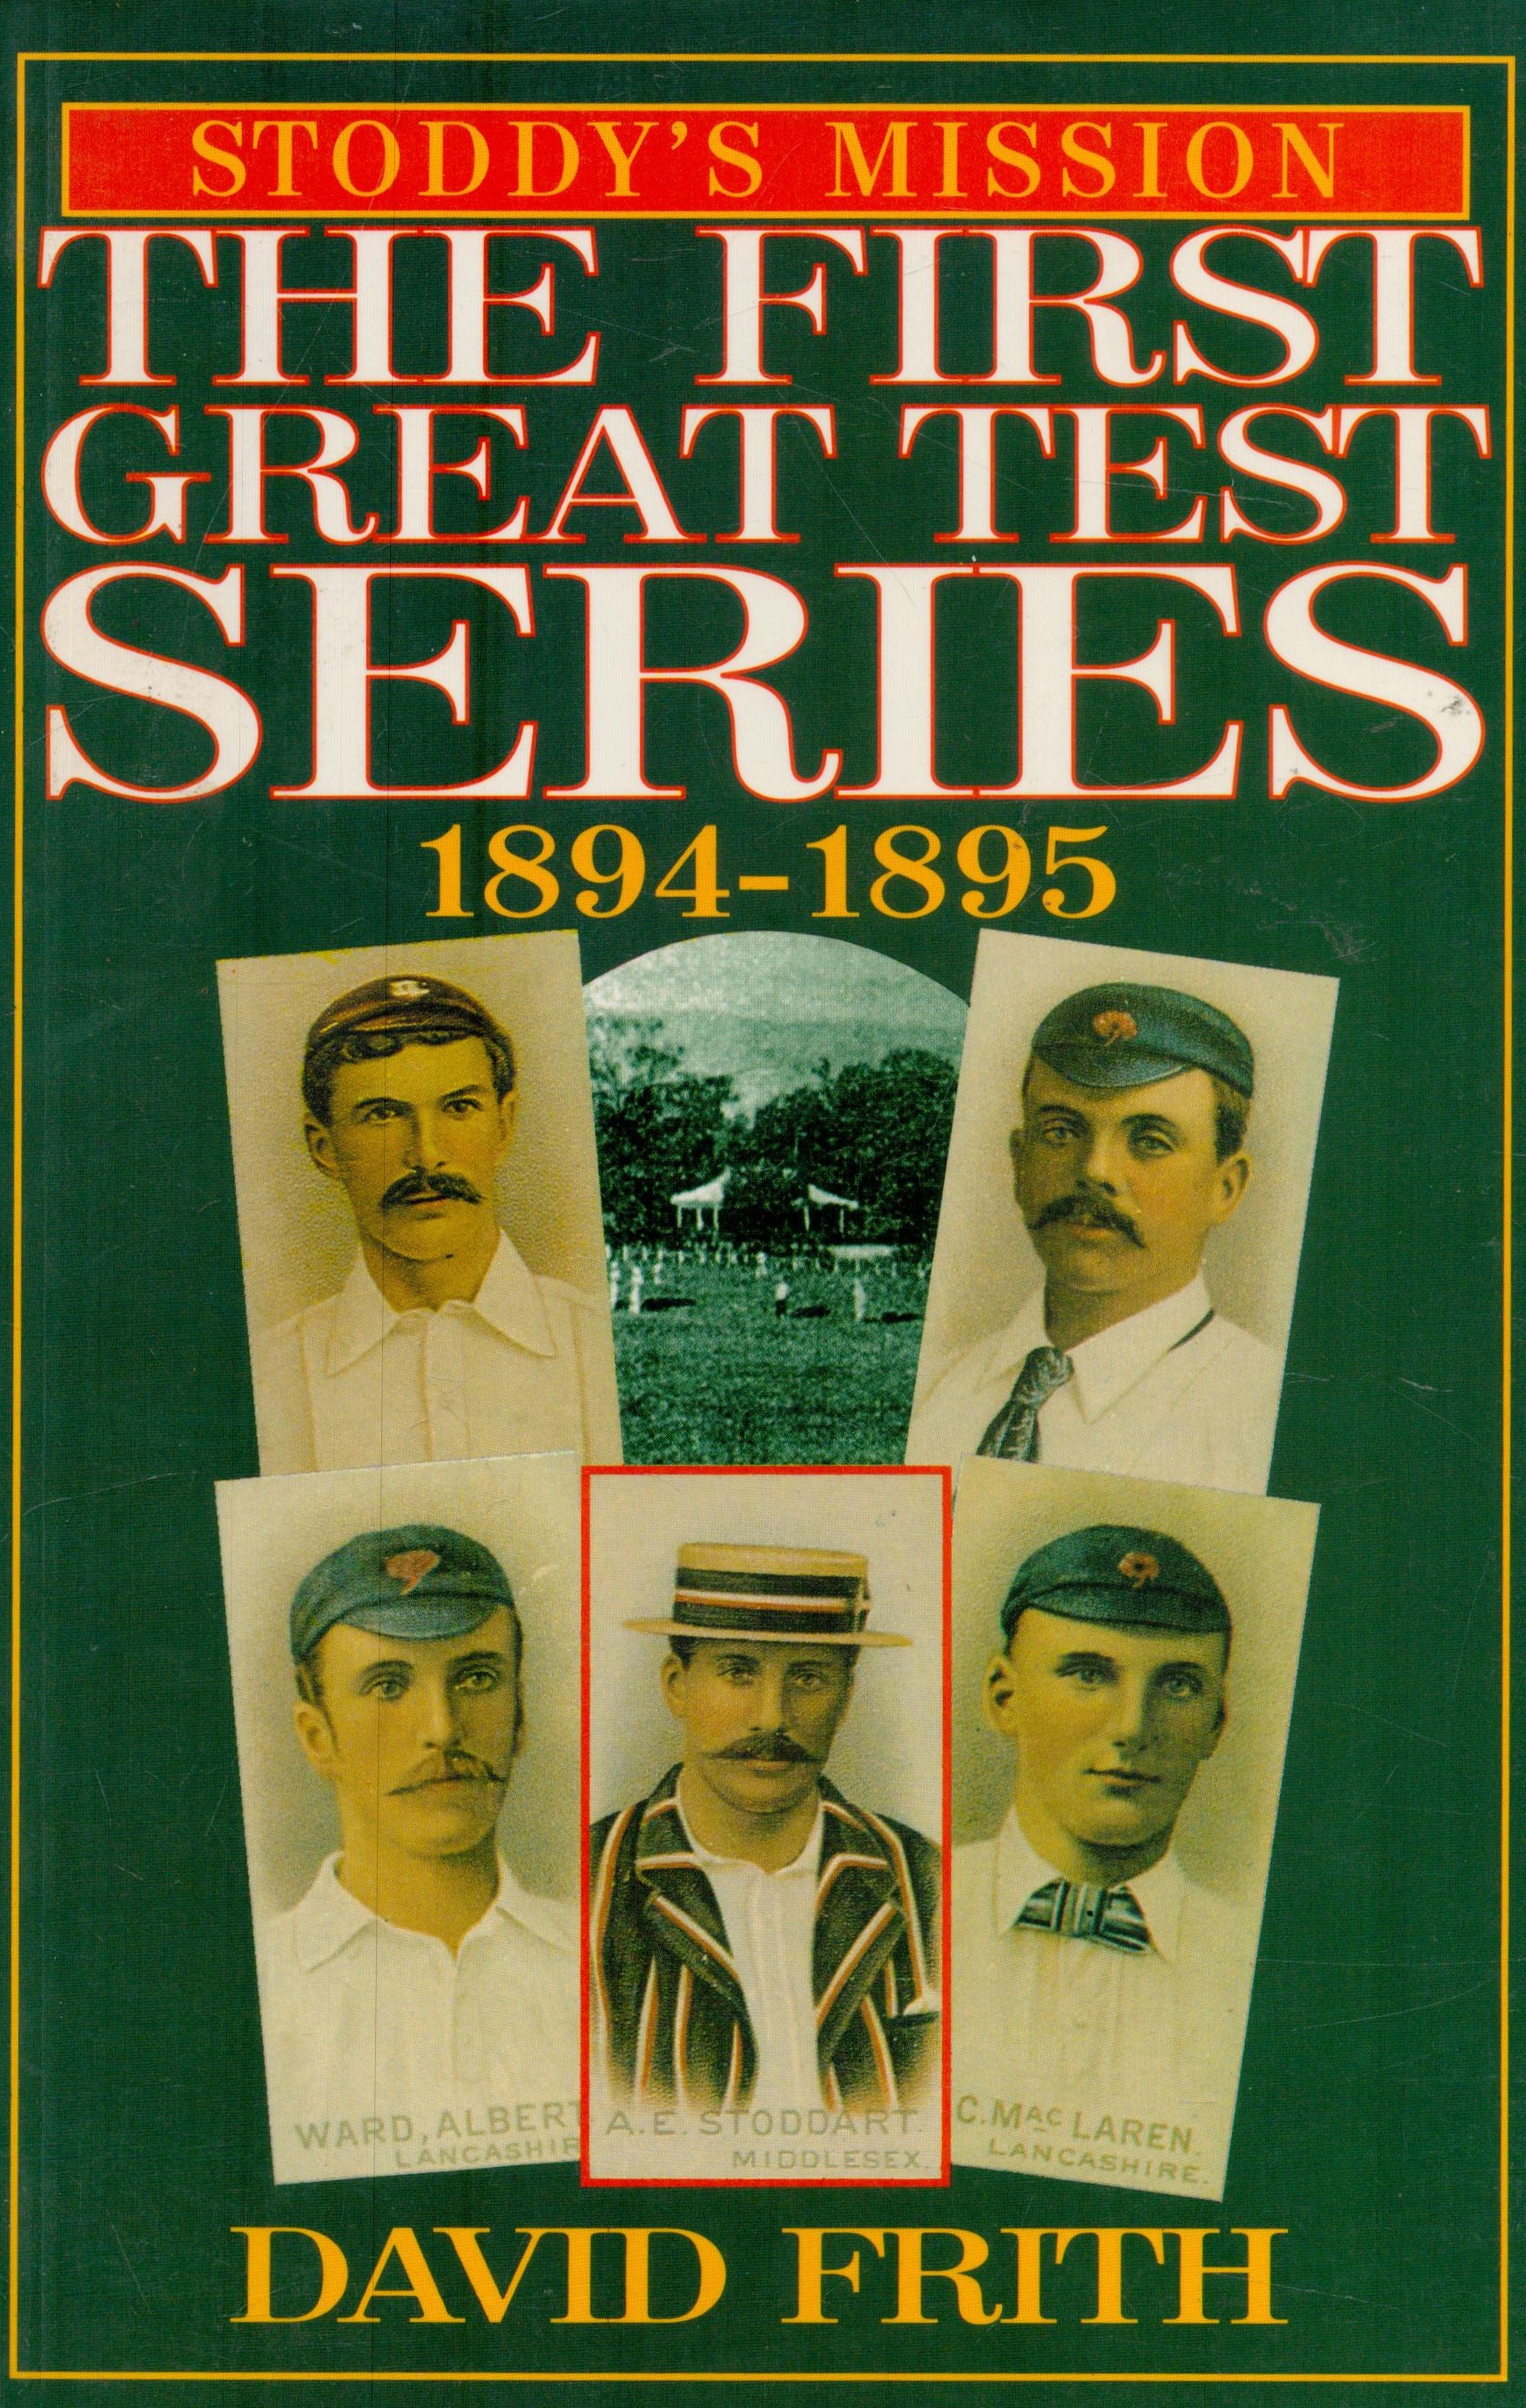 Stoddy`s Mission The First Great Test Series 1894-1985 David Frith Paperback book, 216 pages. Good